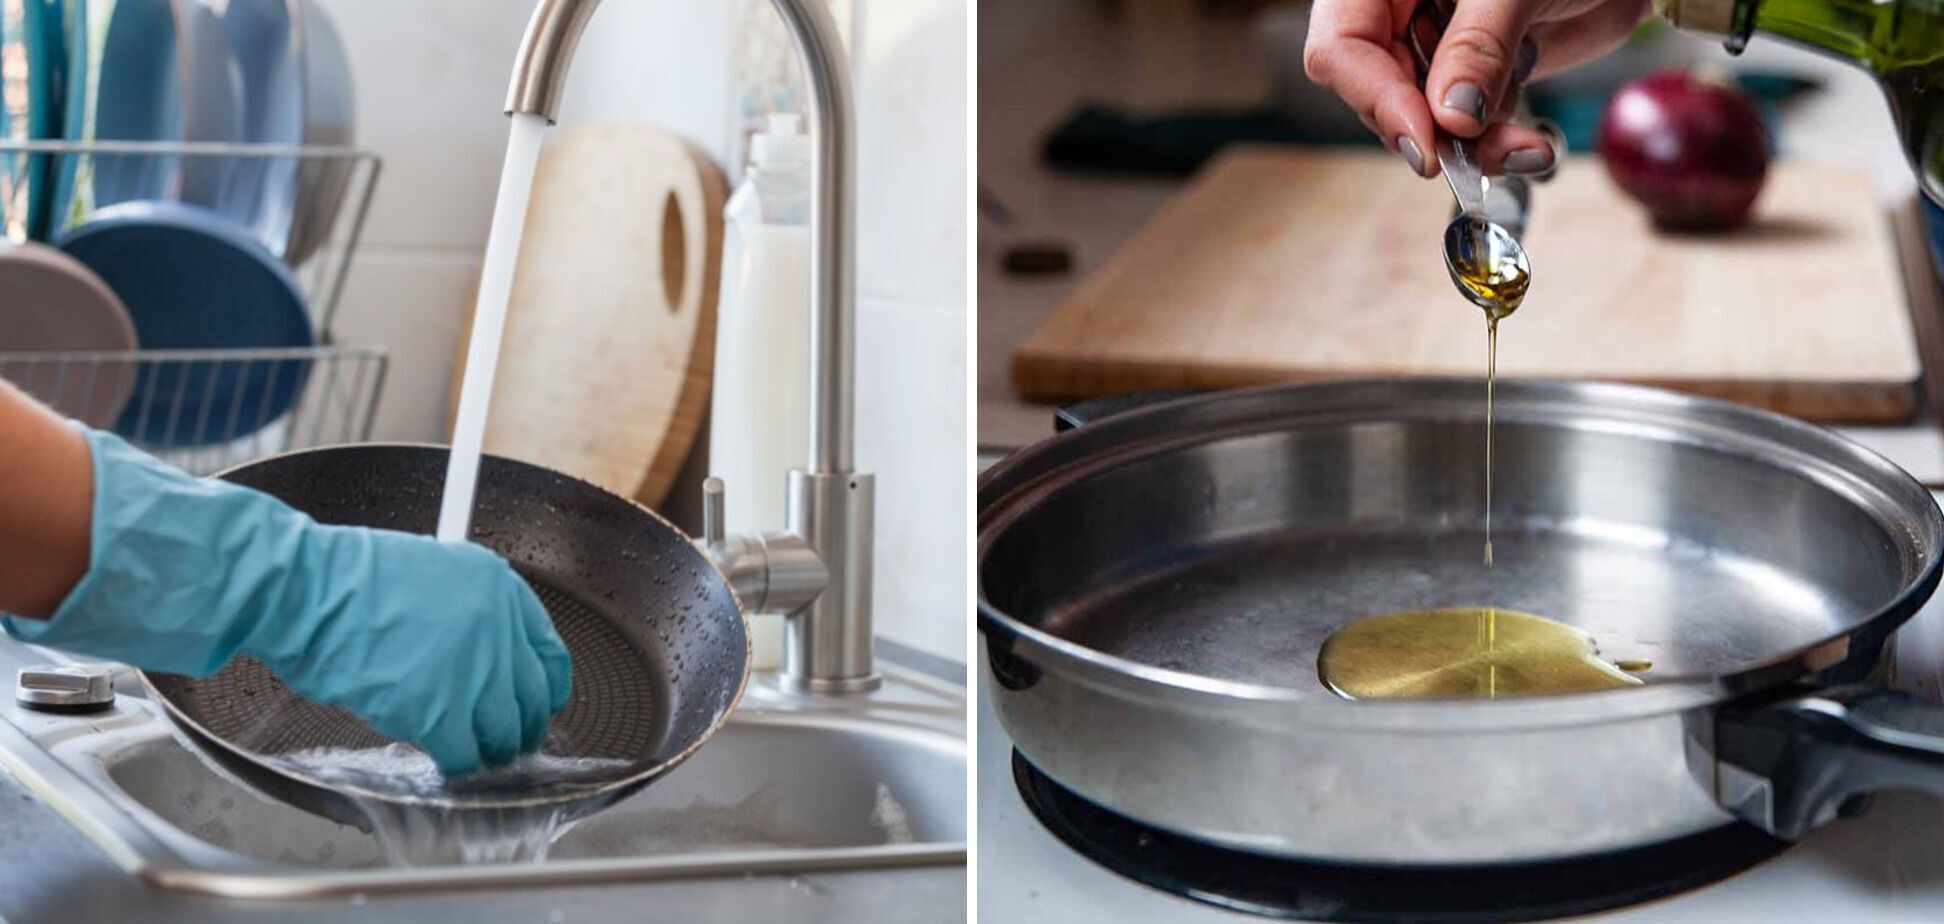 How to clean pots and pans properly